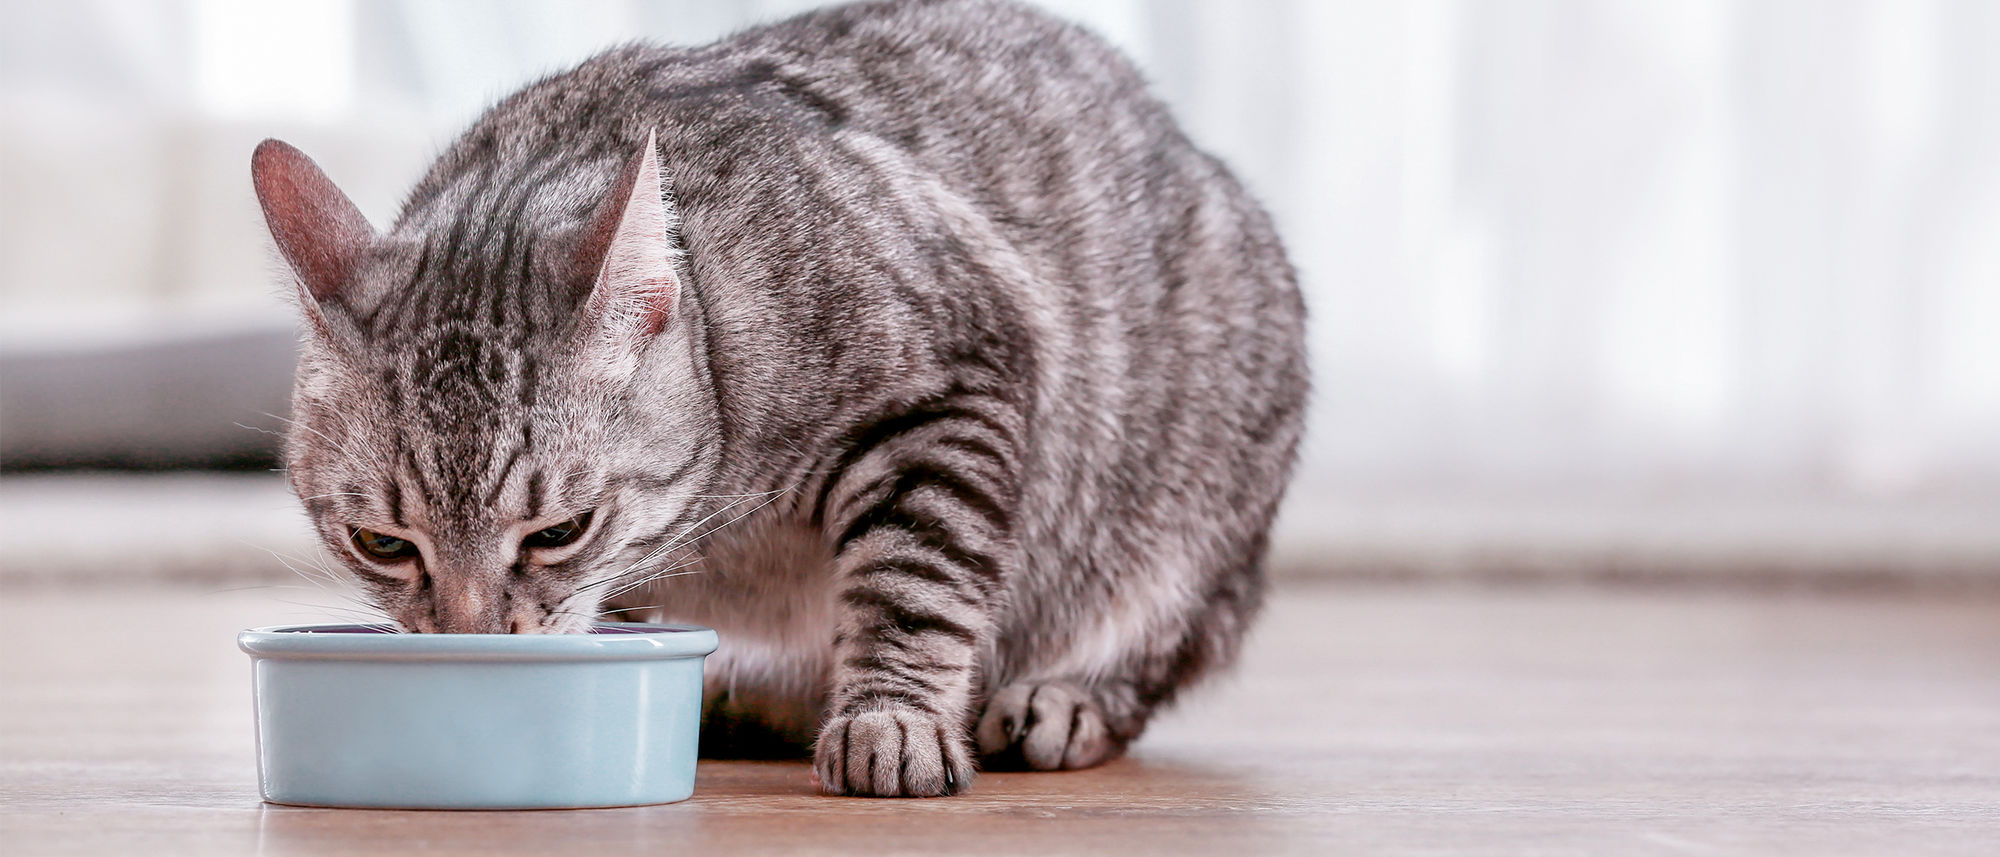 Adult cat eating from bowl